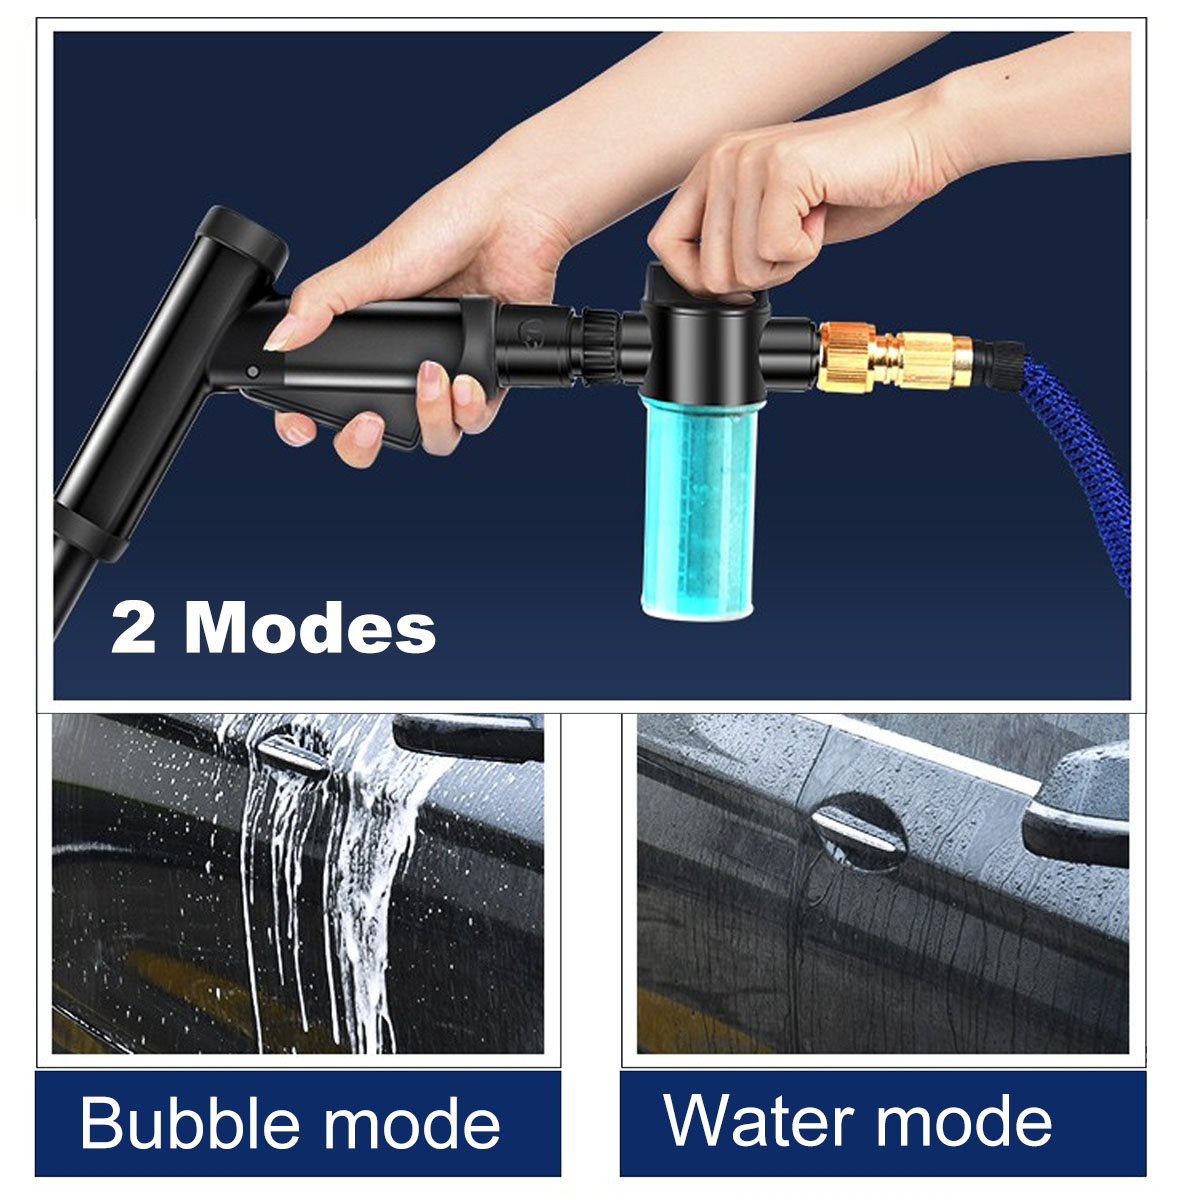 Portable-Cordless-Car-Washer-High-Pressure-Car-Household-Washer-Cleaner-Guns-Pumps-Tool-with-Accesso-1920844-5